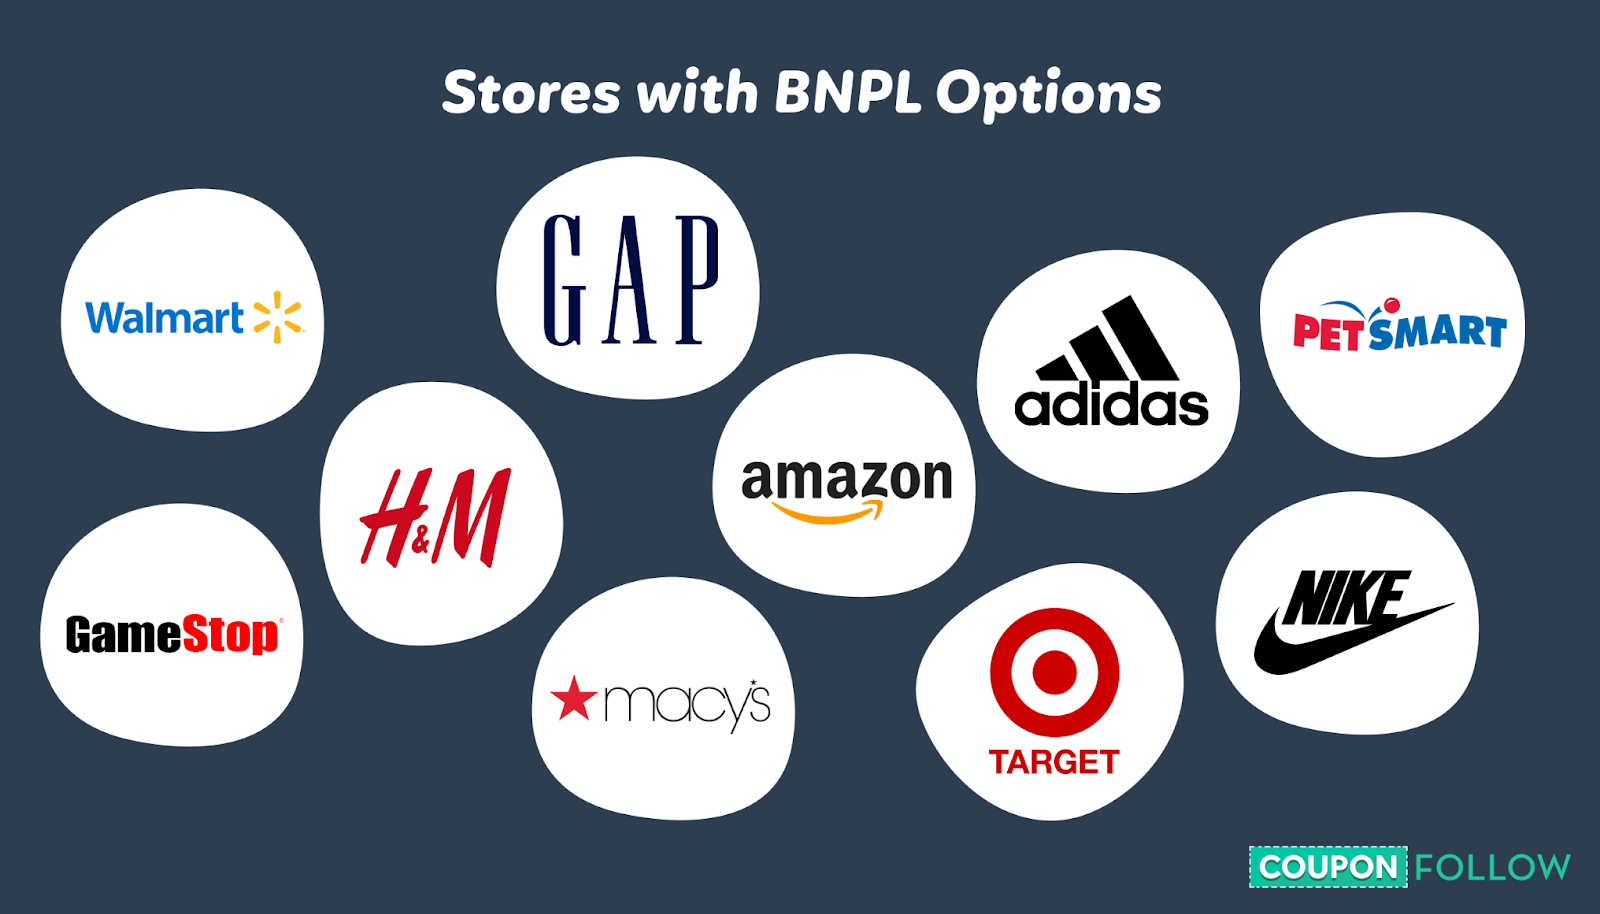 An image introducing the stores that include BNPL options